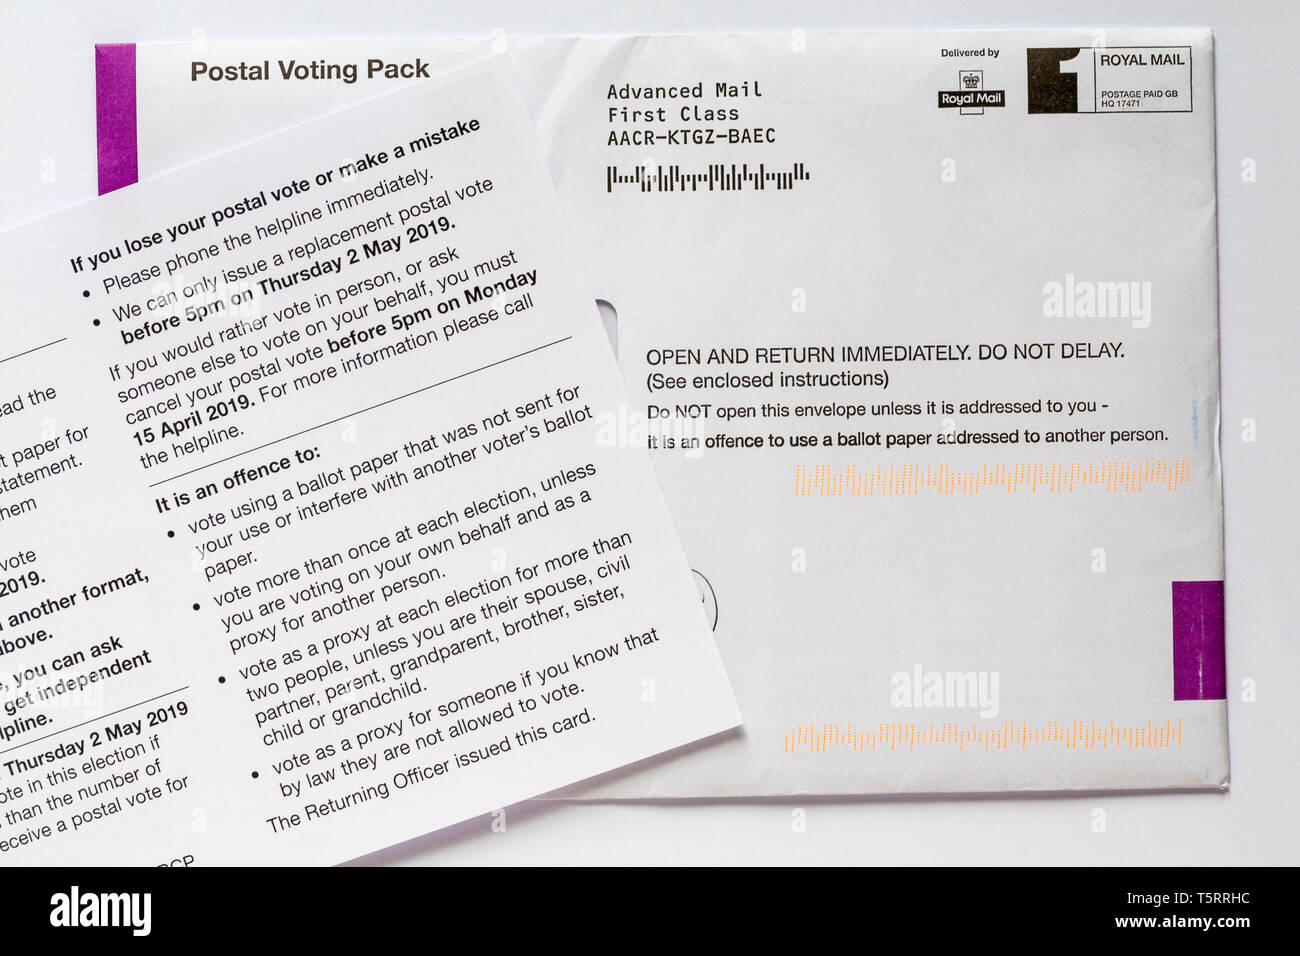 Postal Voting pack and Poll card for local elections 2019 in UK Stock Photo